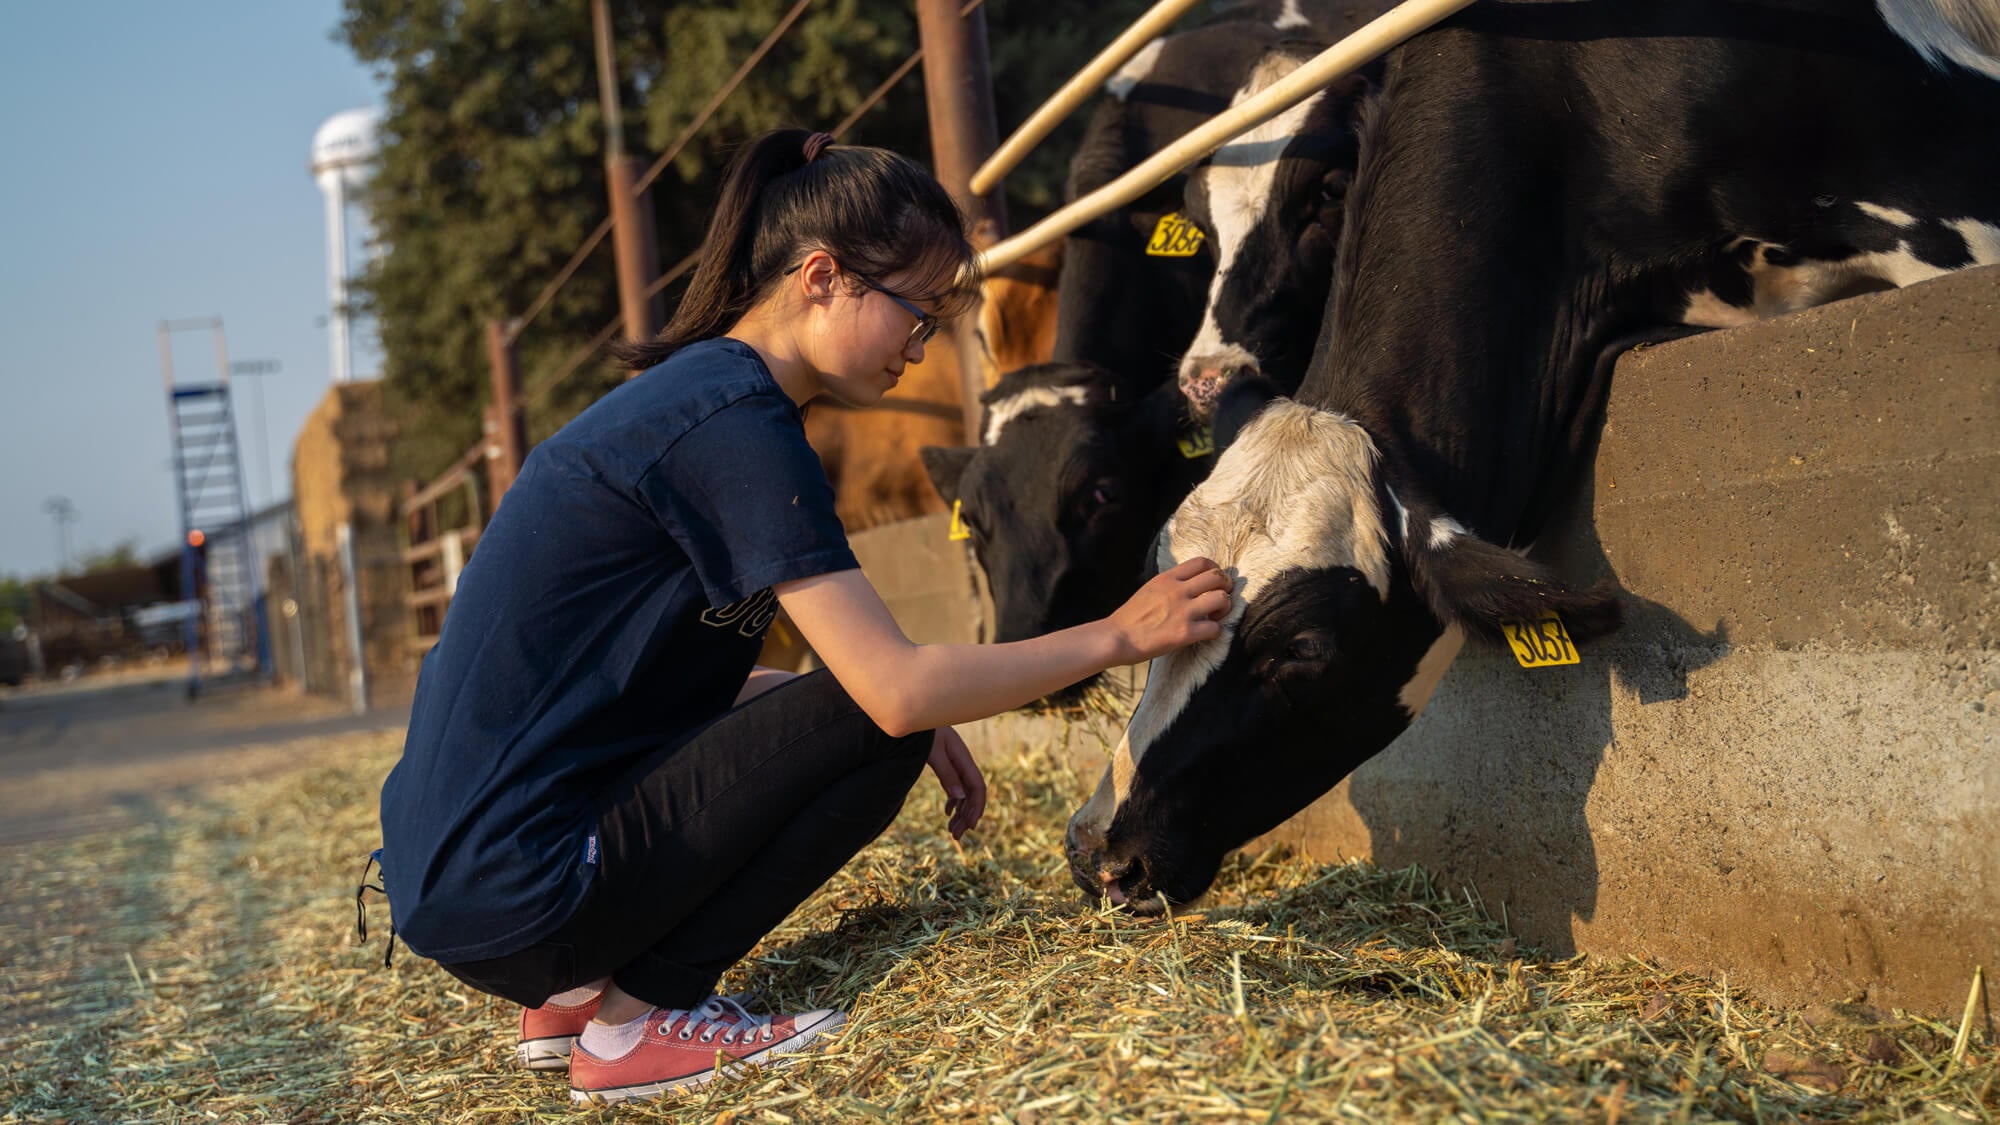 A student in a dark blue t-shirt and glasses crouches to pet black and white dairy cows behind a fence at UC Davis.